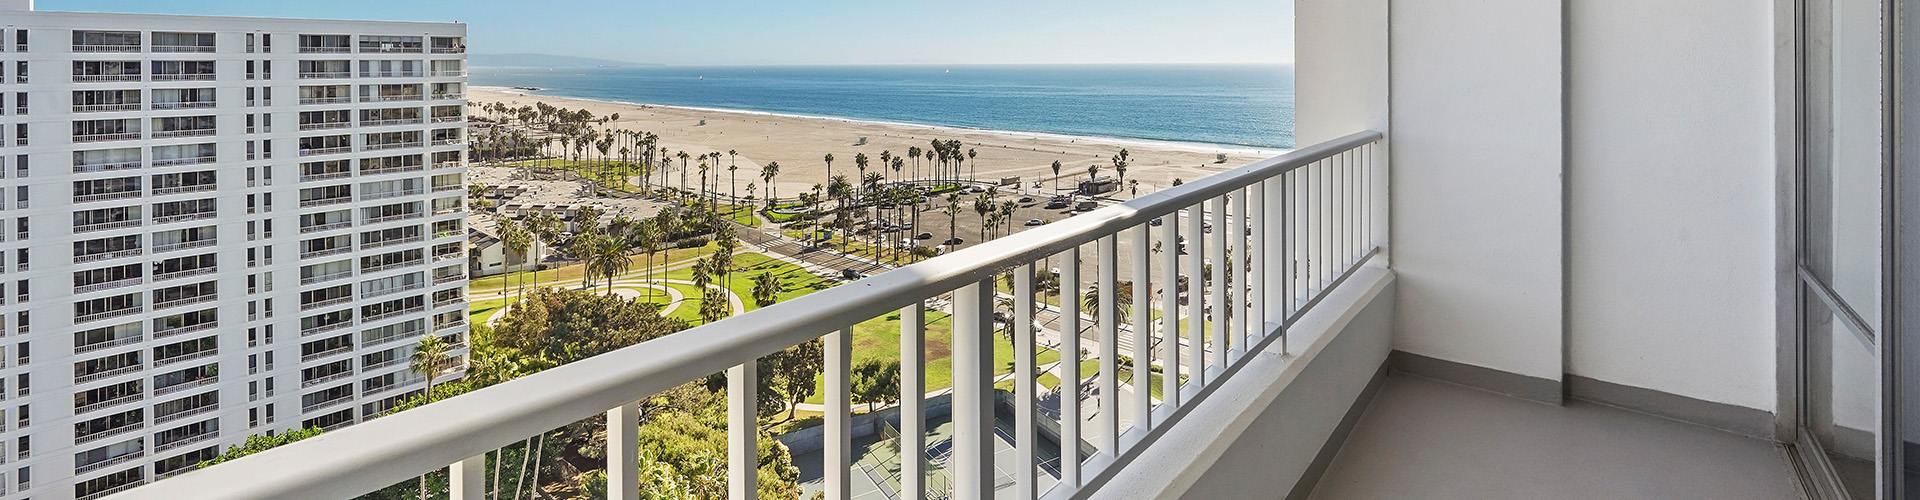 The Shores Apartments in Santa Monica balcony with ocean view